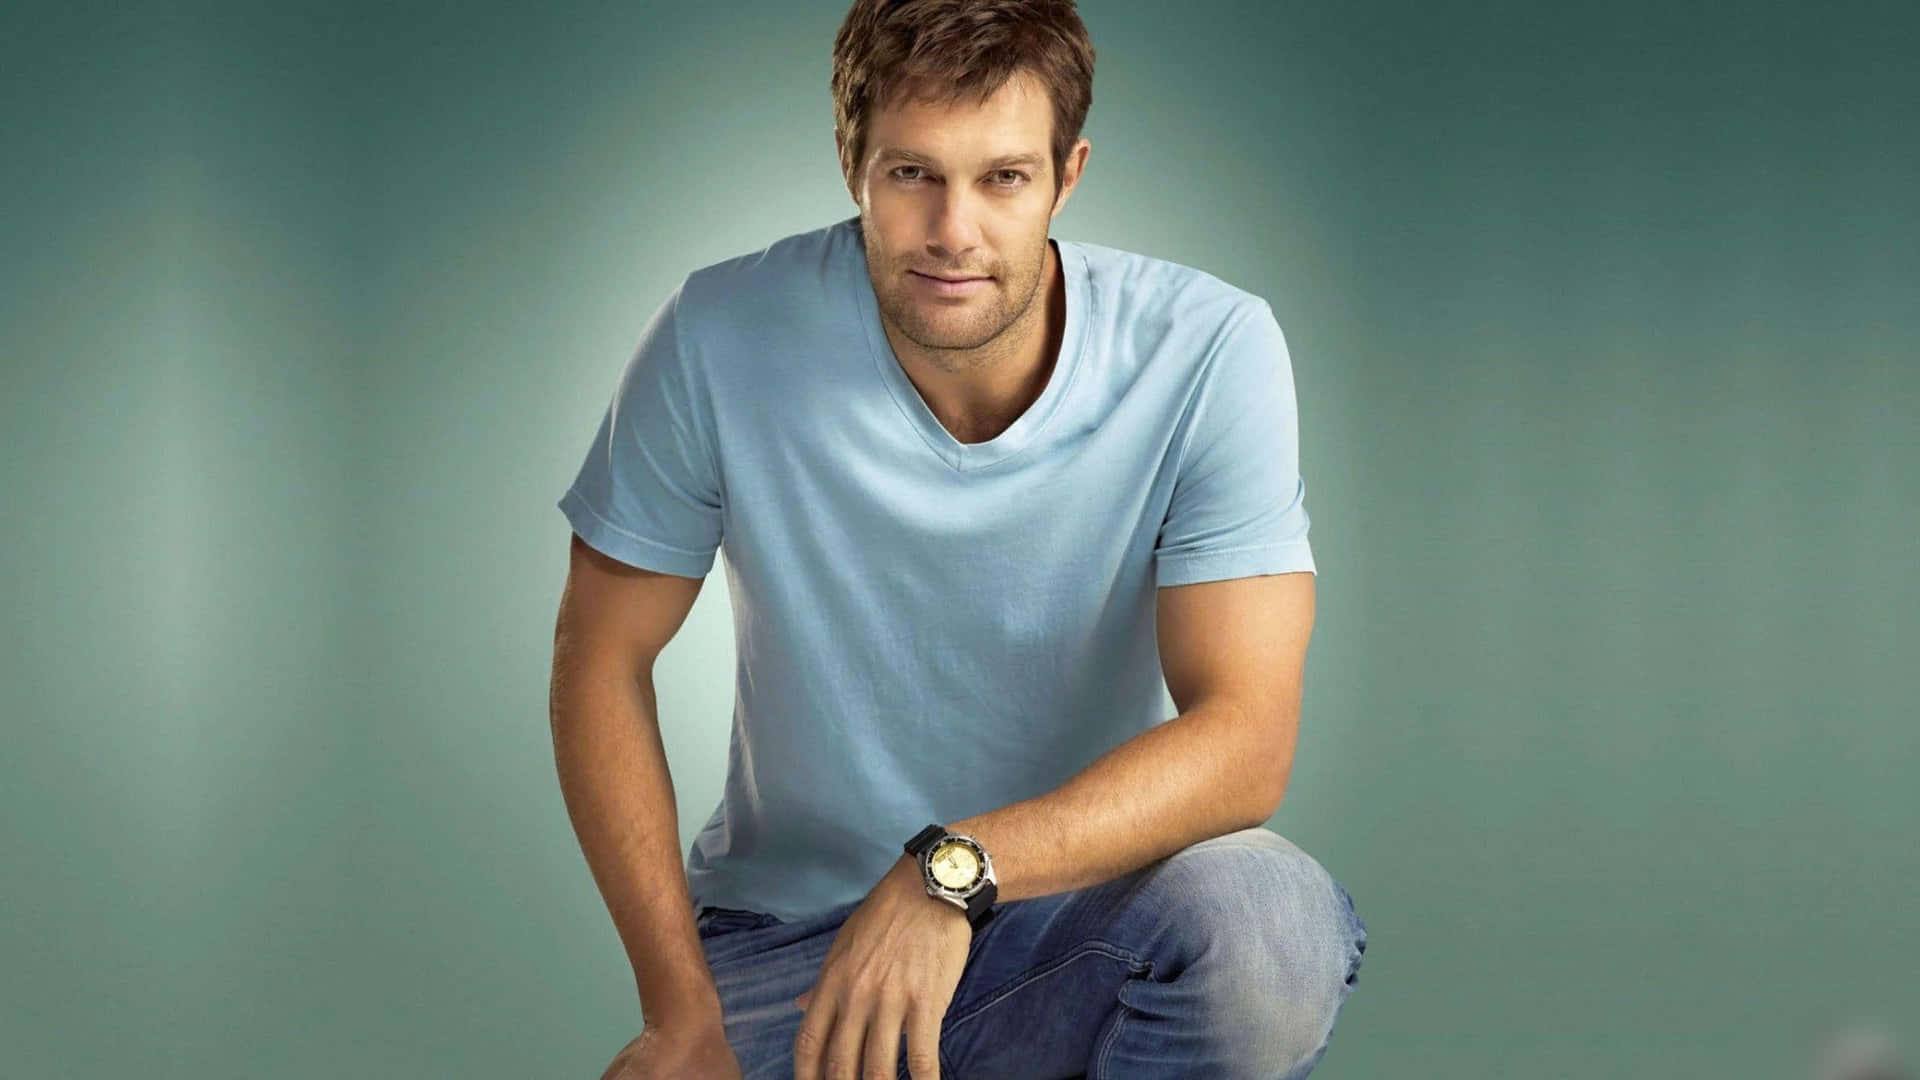 A Man In A Blue Shirt And Jeans Posing